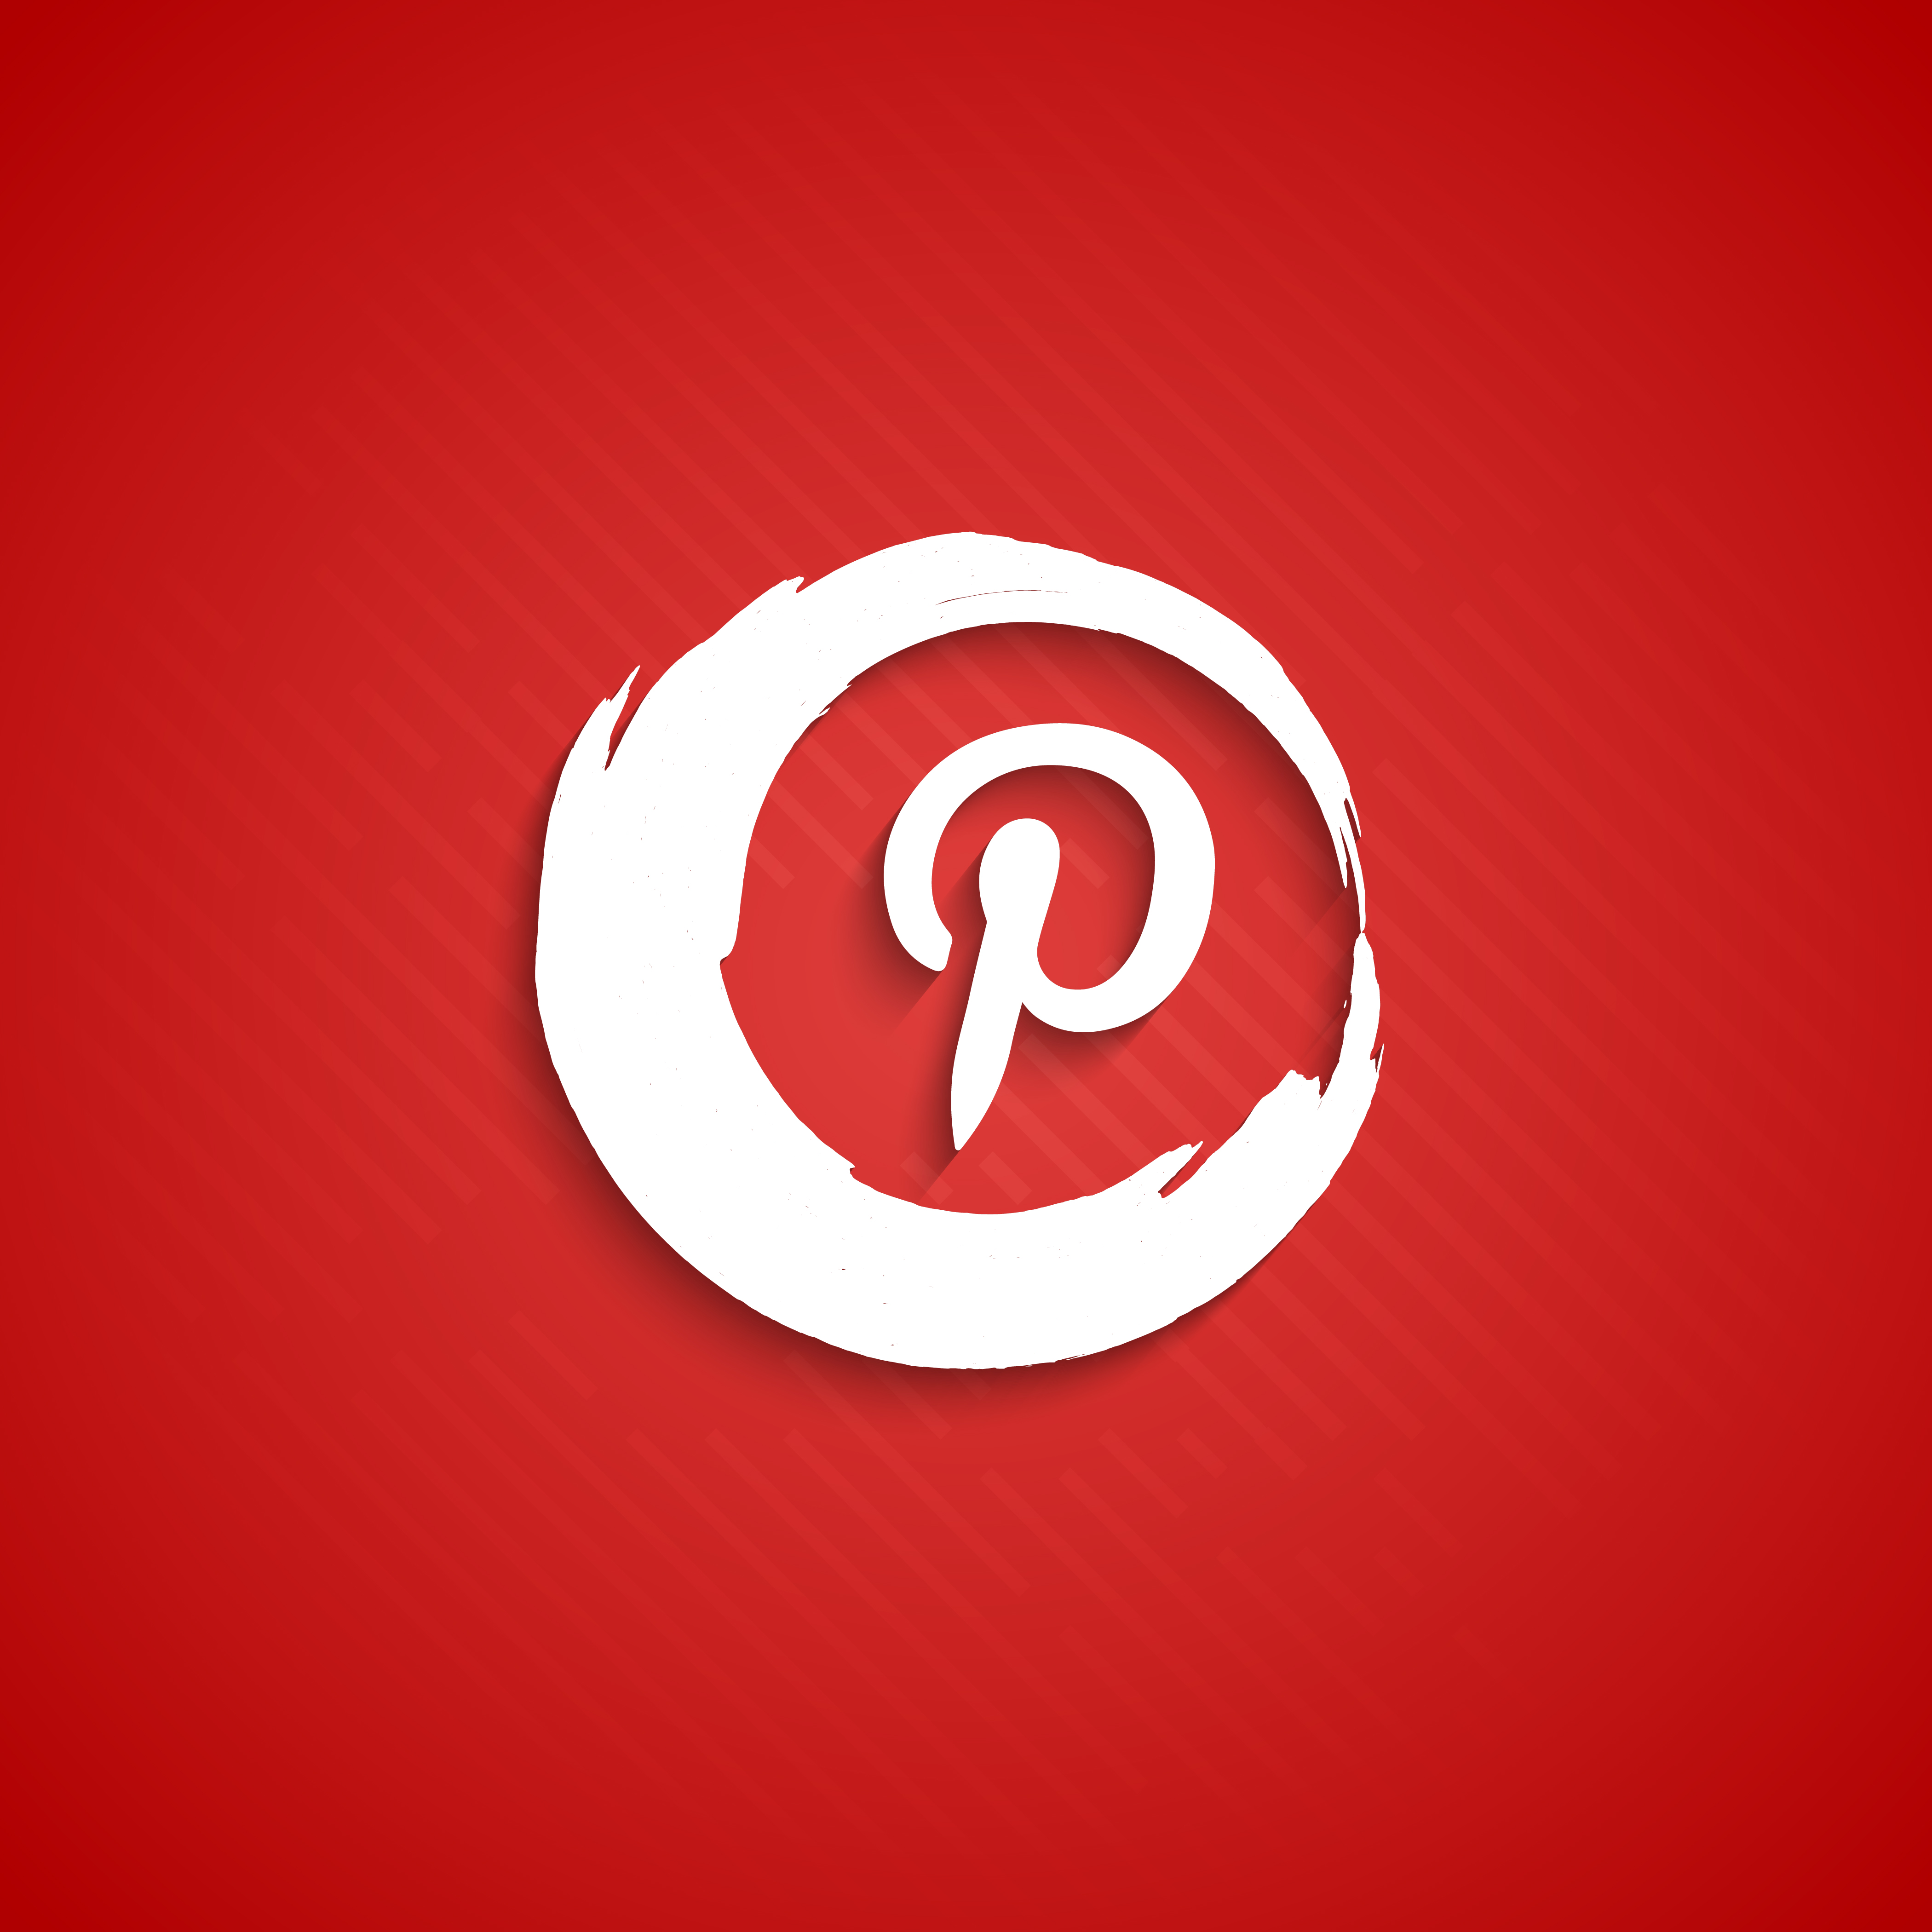 Download the Abstract pinterest icon background 253080